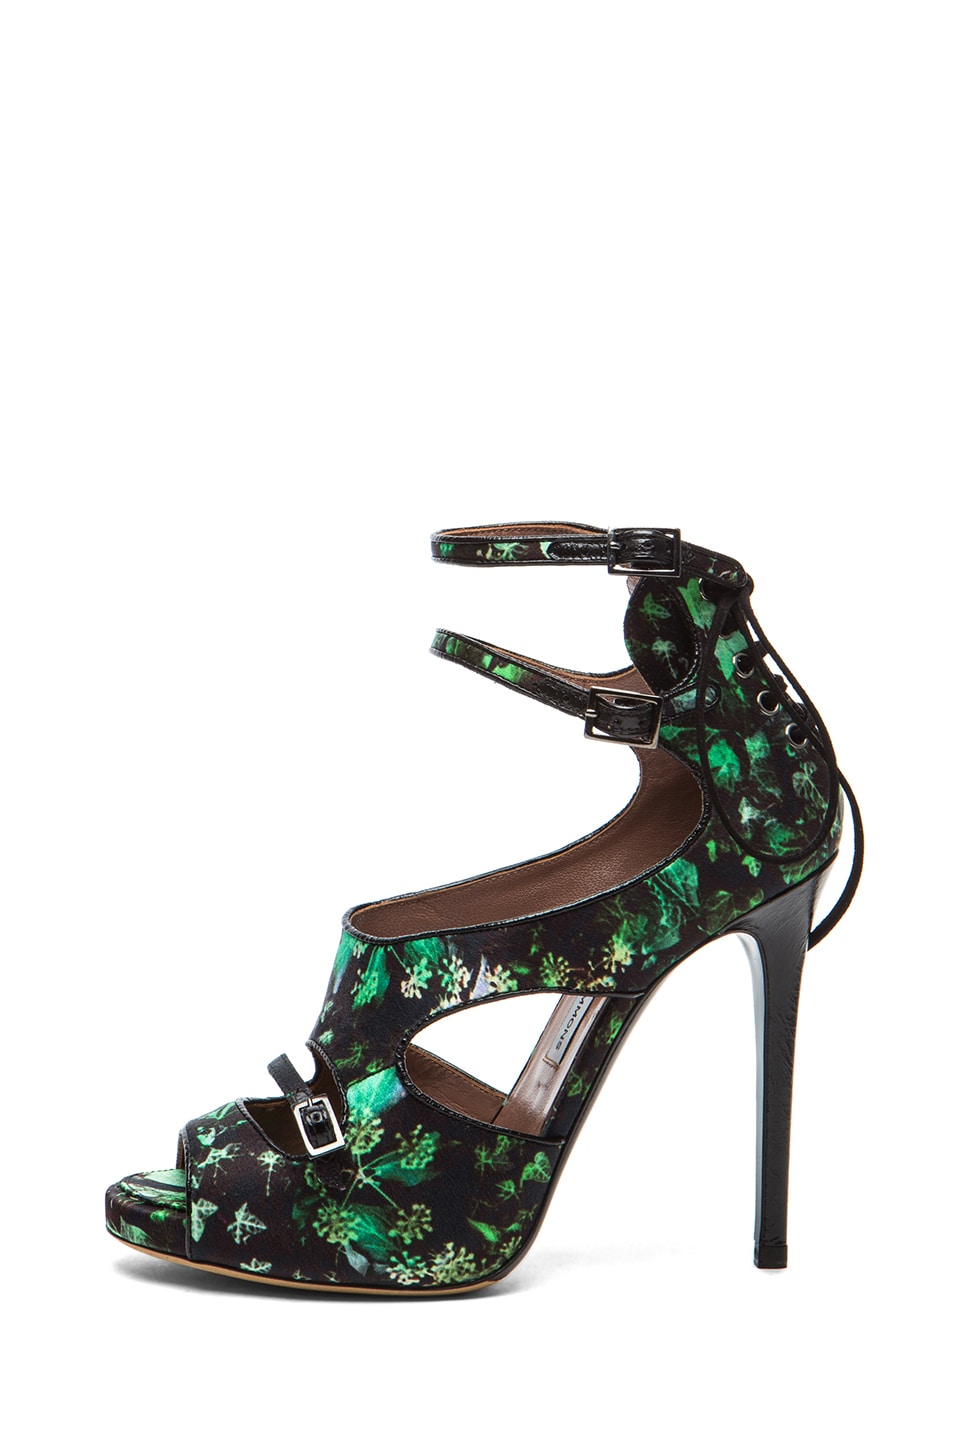 Image 1 of Tabitha Simmons Bailey Satin Heels in Ivy Print